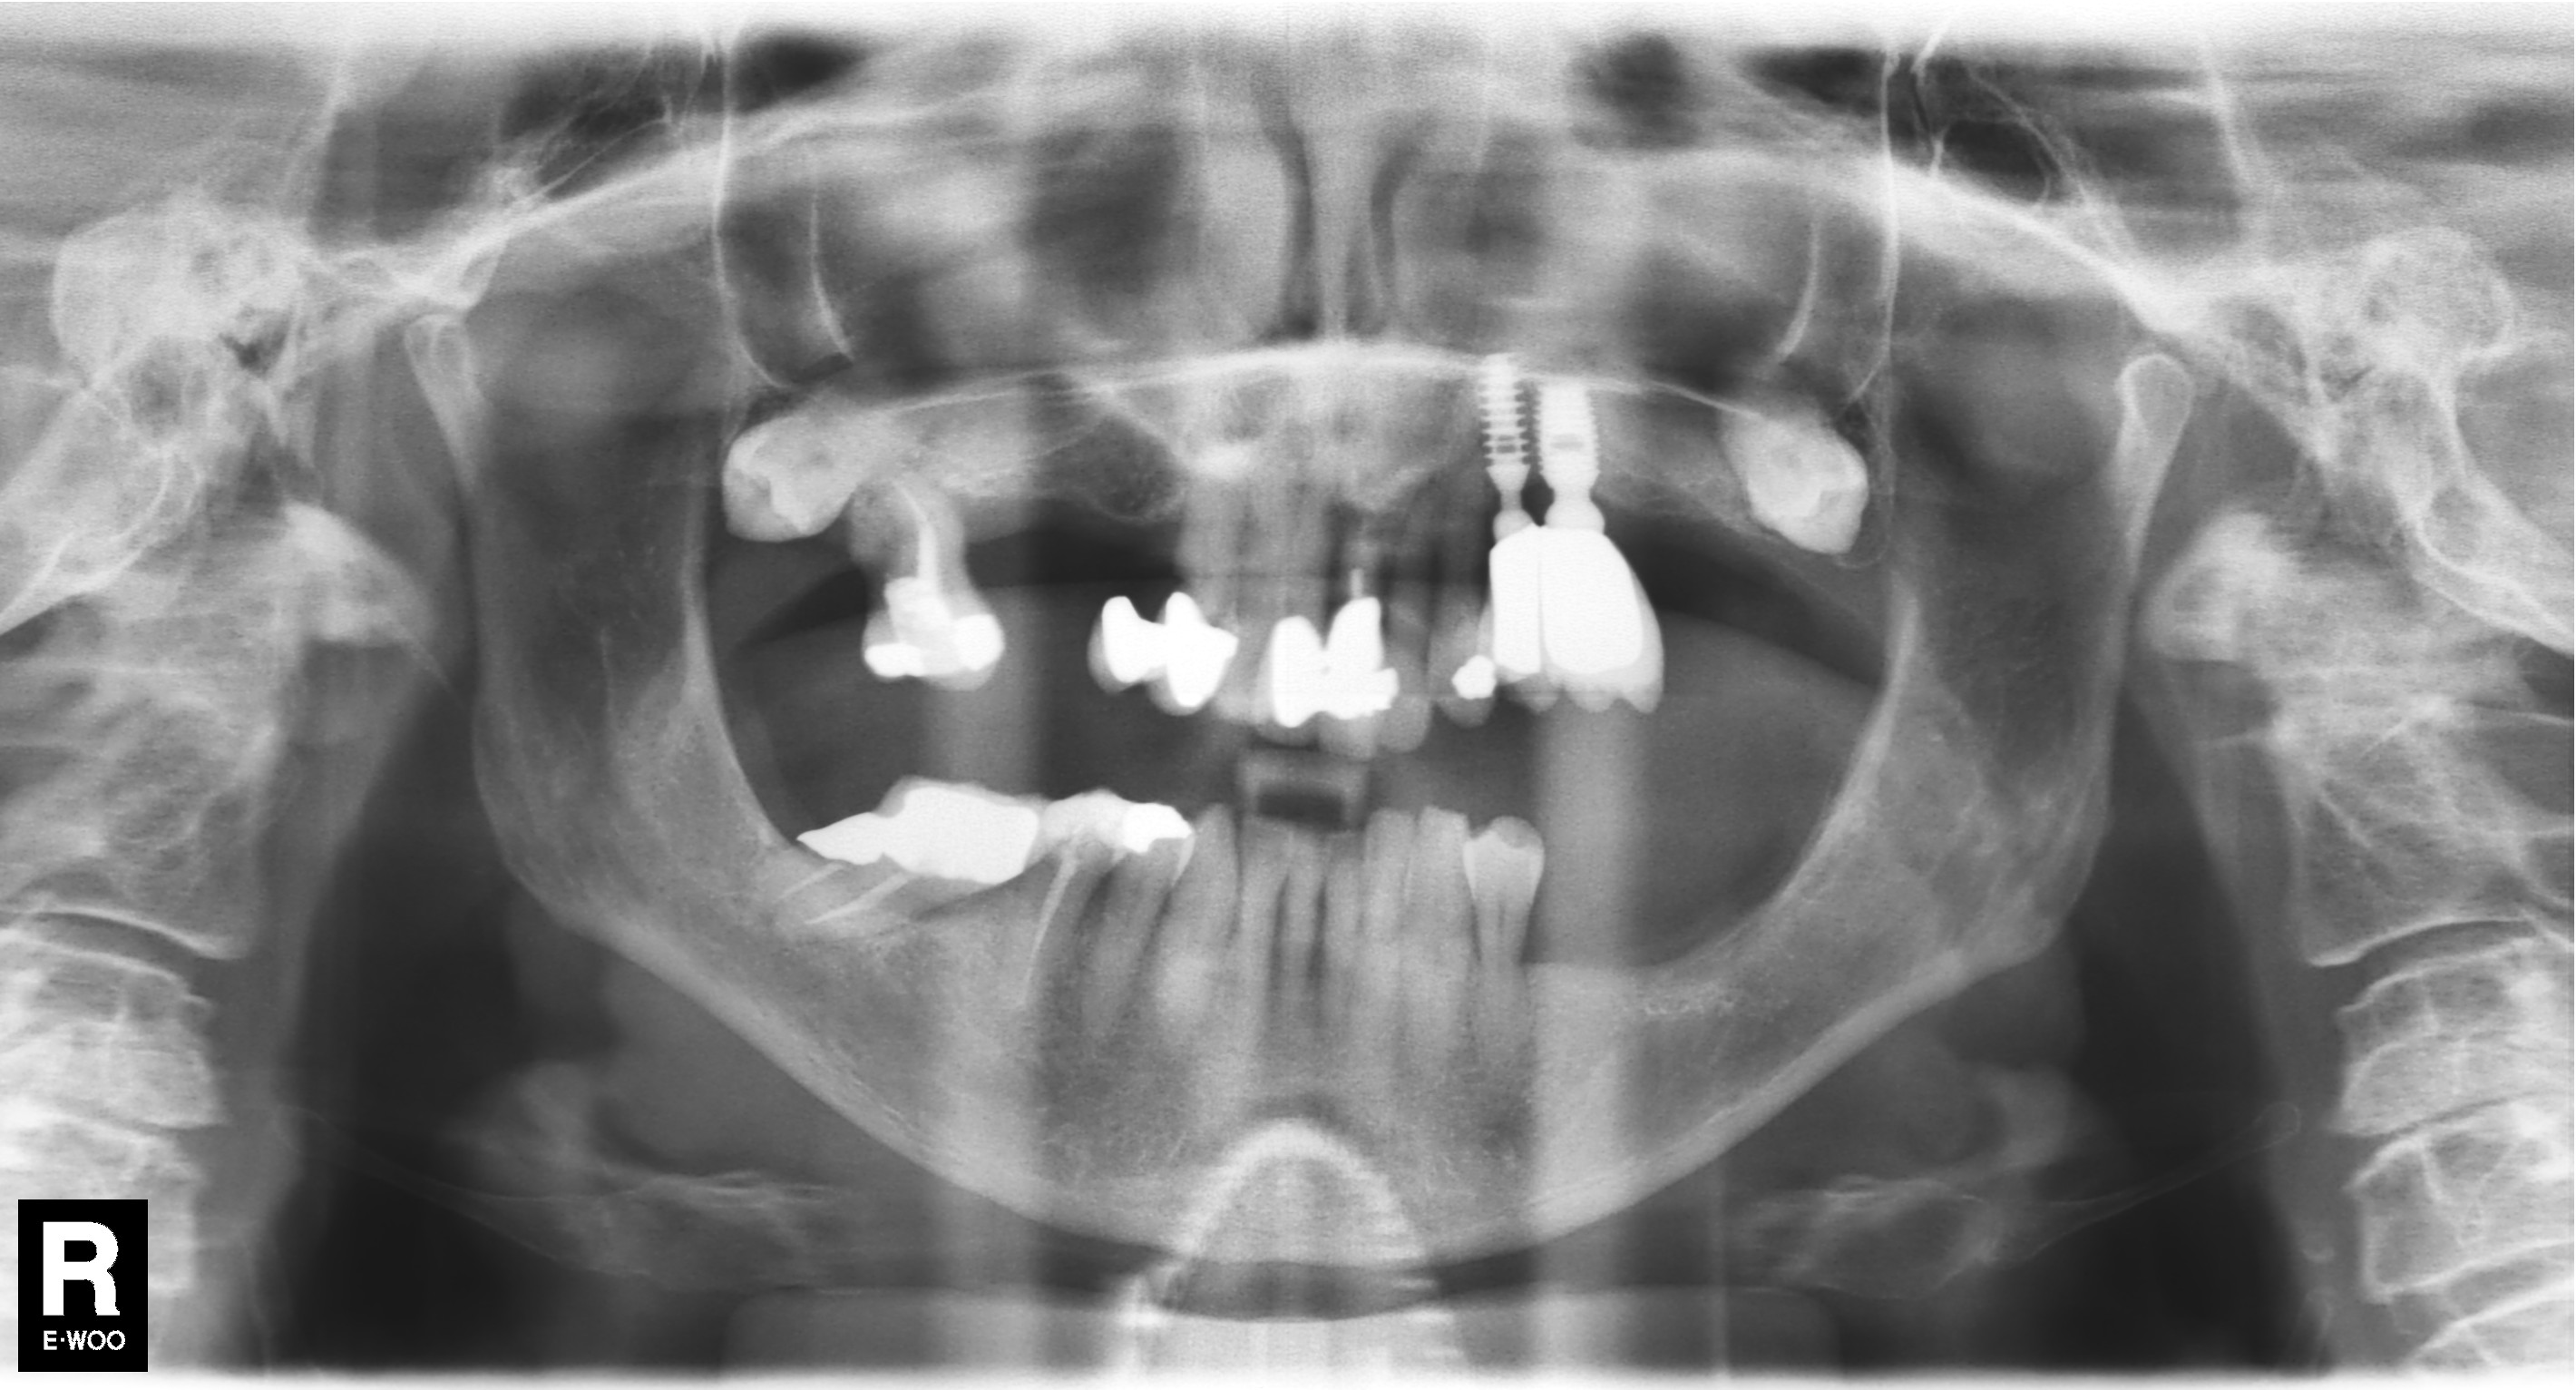 radiograph before dental implant treatment showing existing dental implants and natural teeth